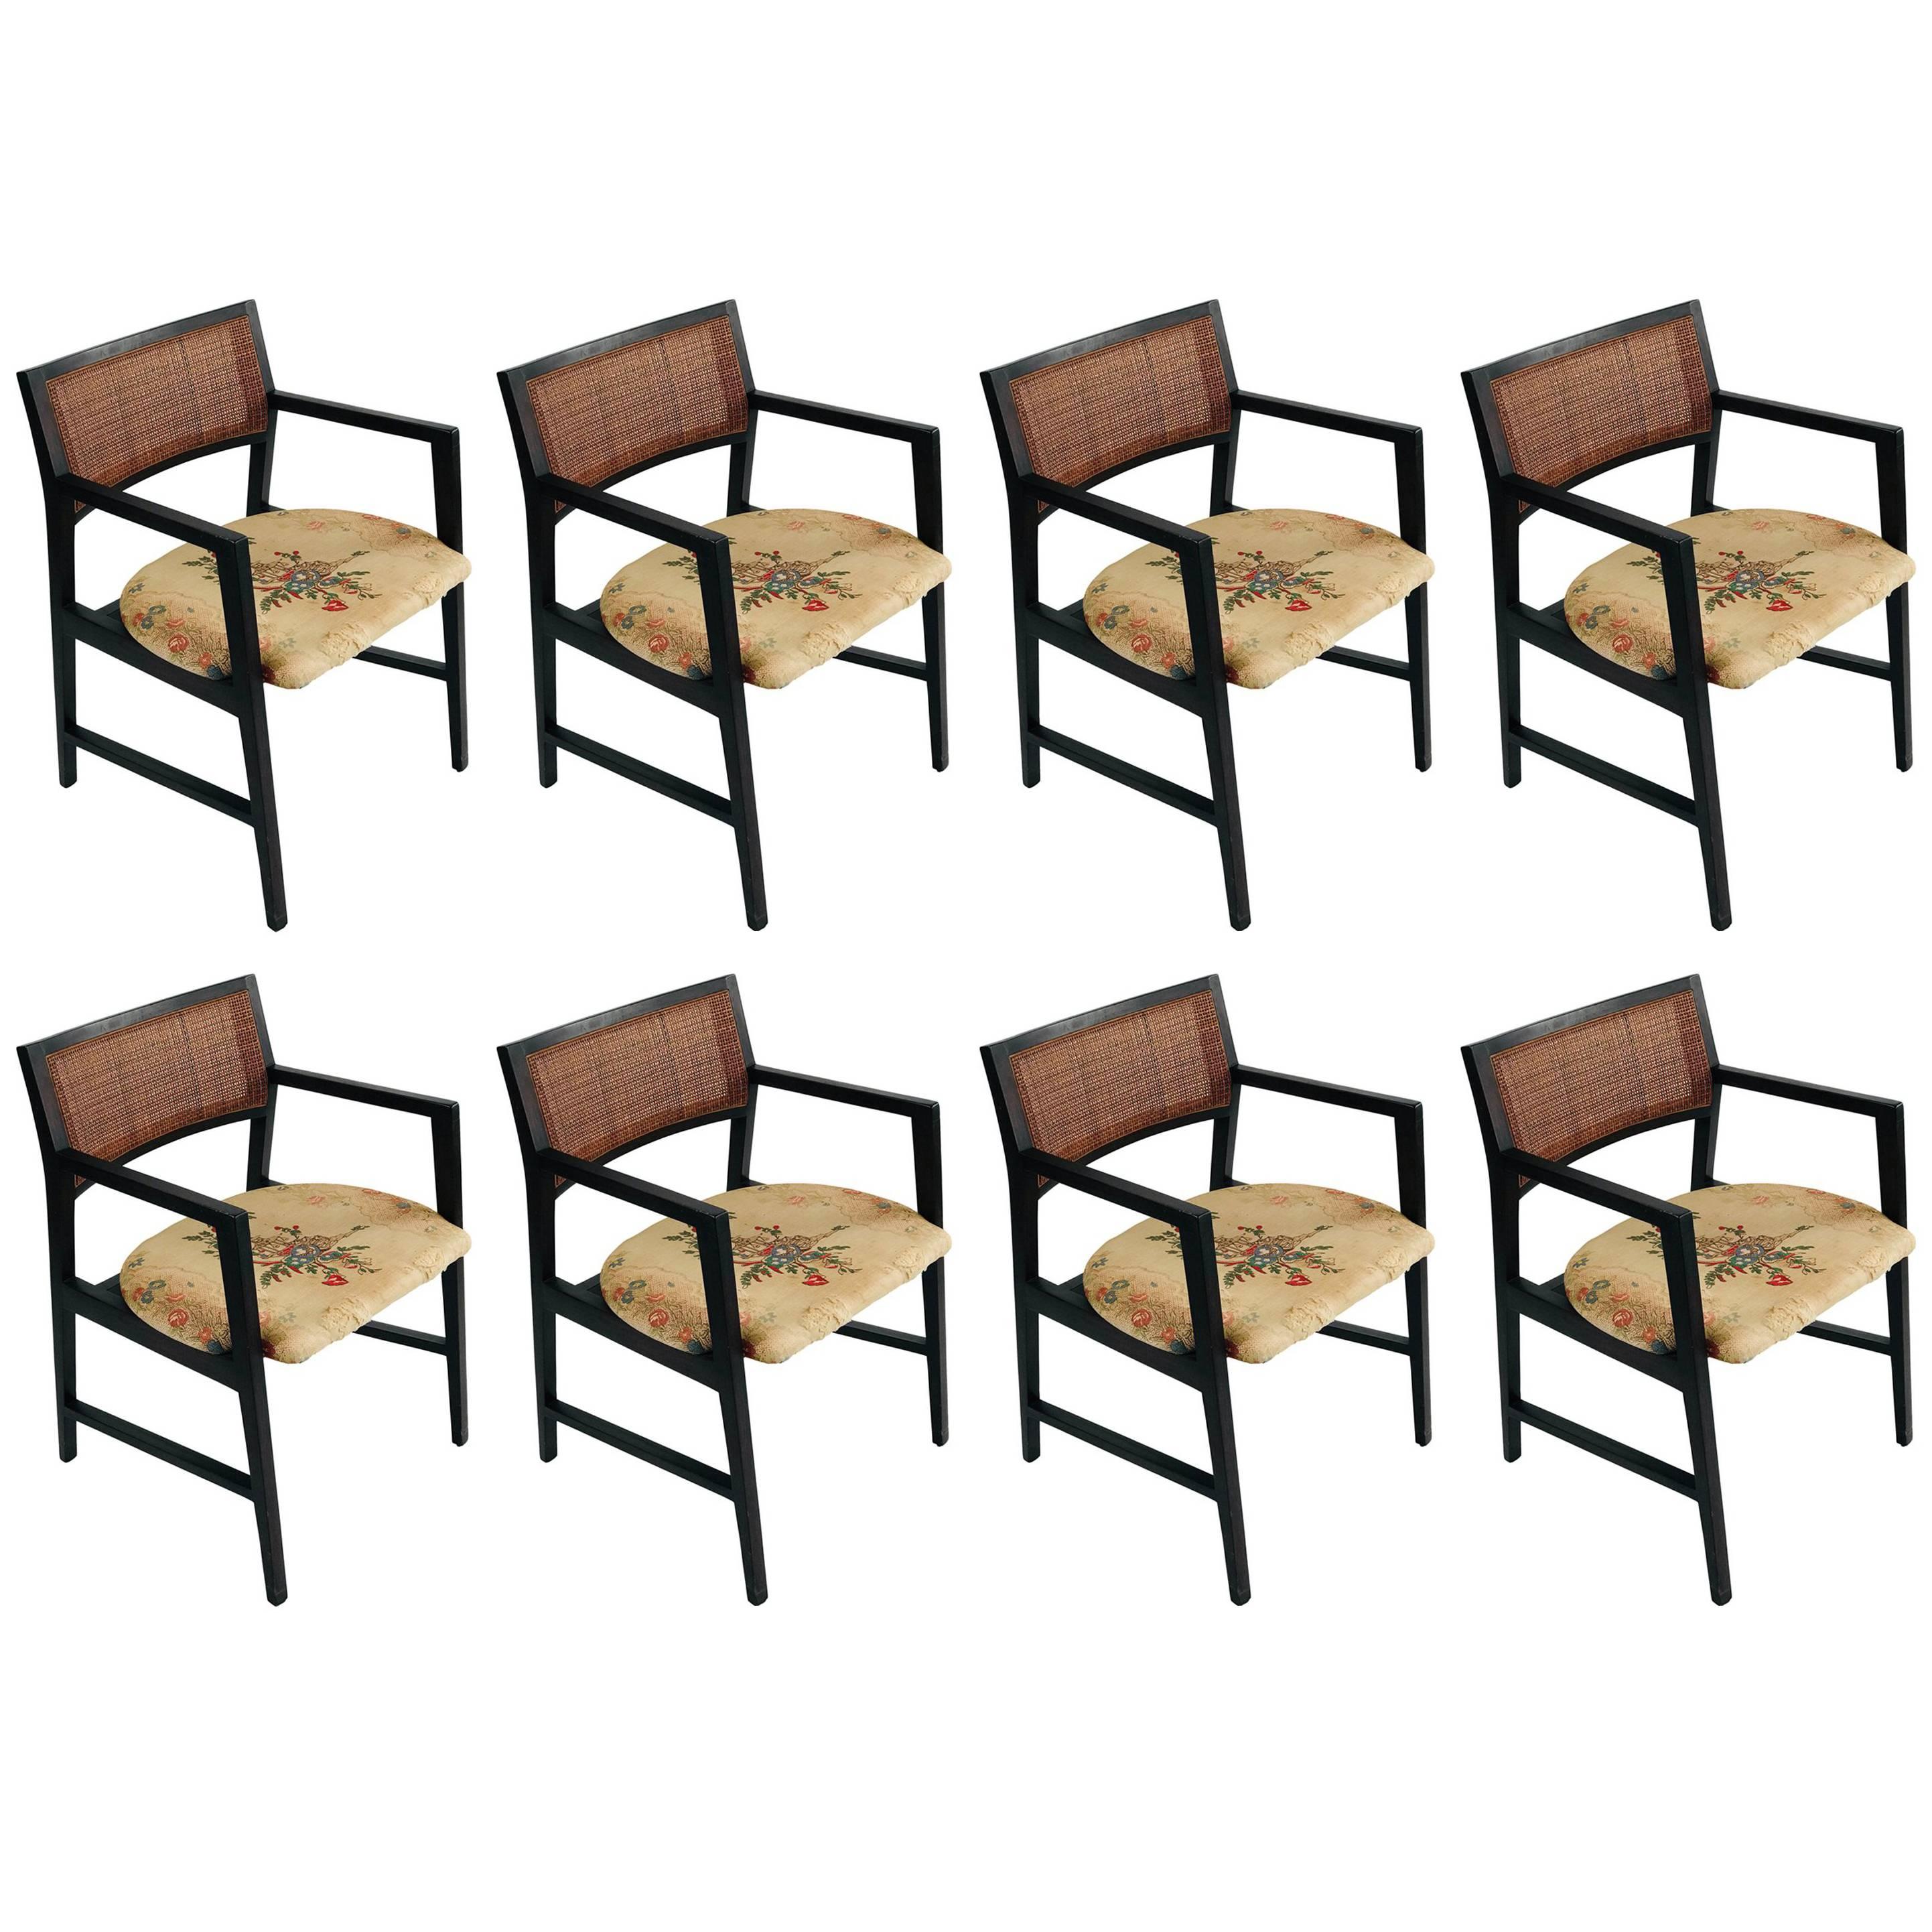 Midcentury Edward Wormley for Dunbar Dining Chairs SET OF EIGHT